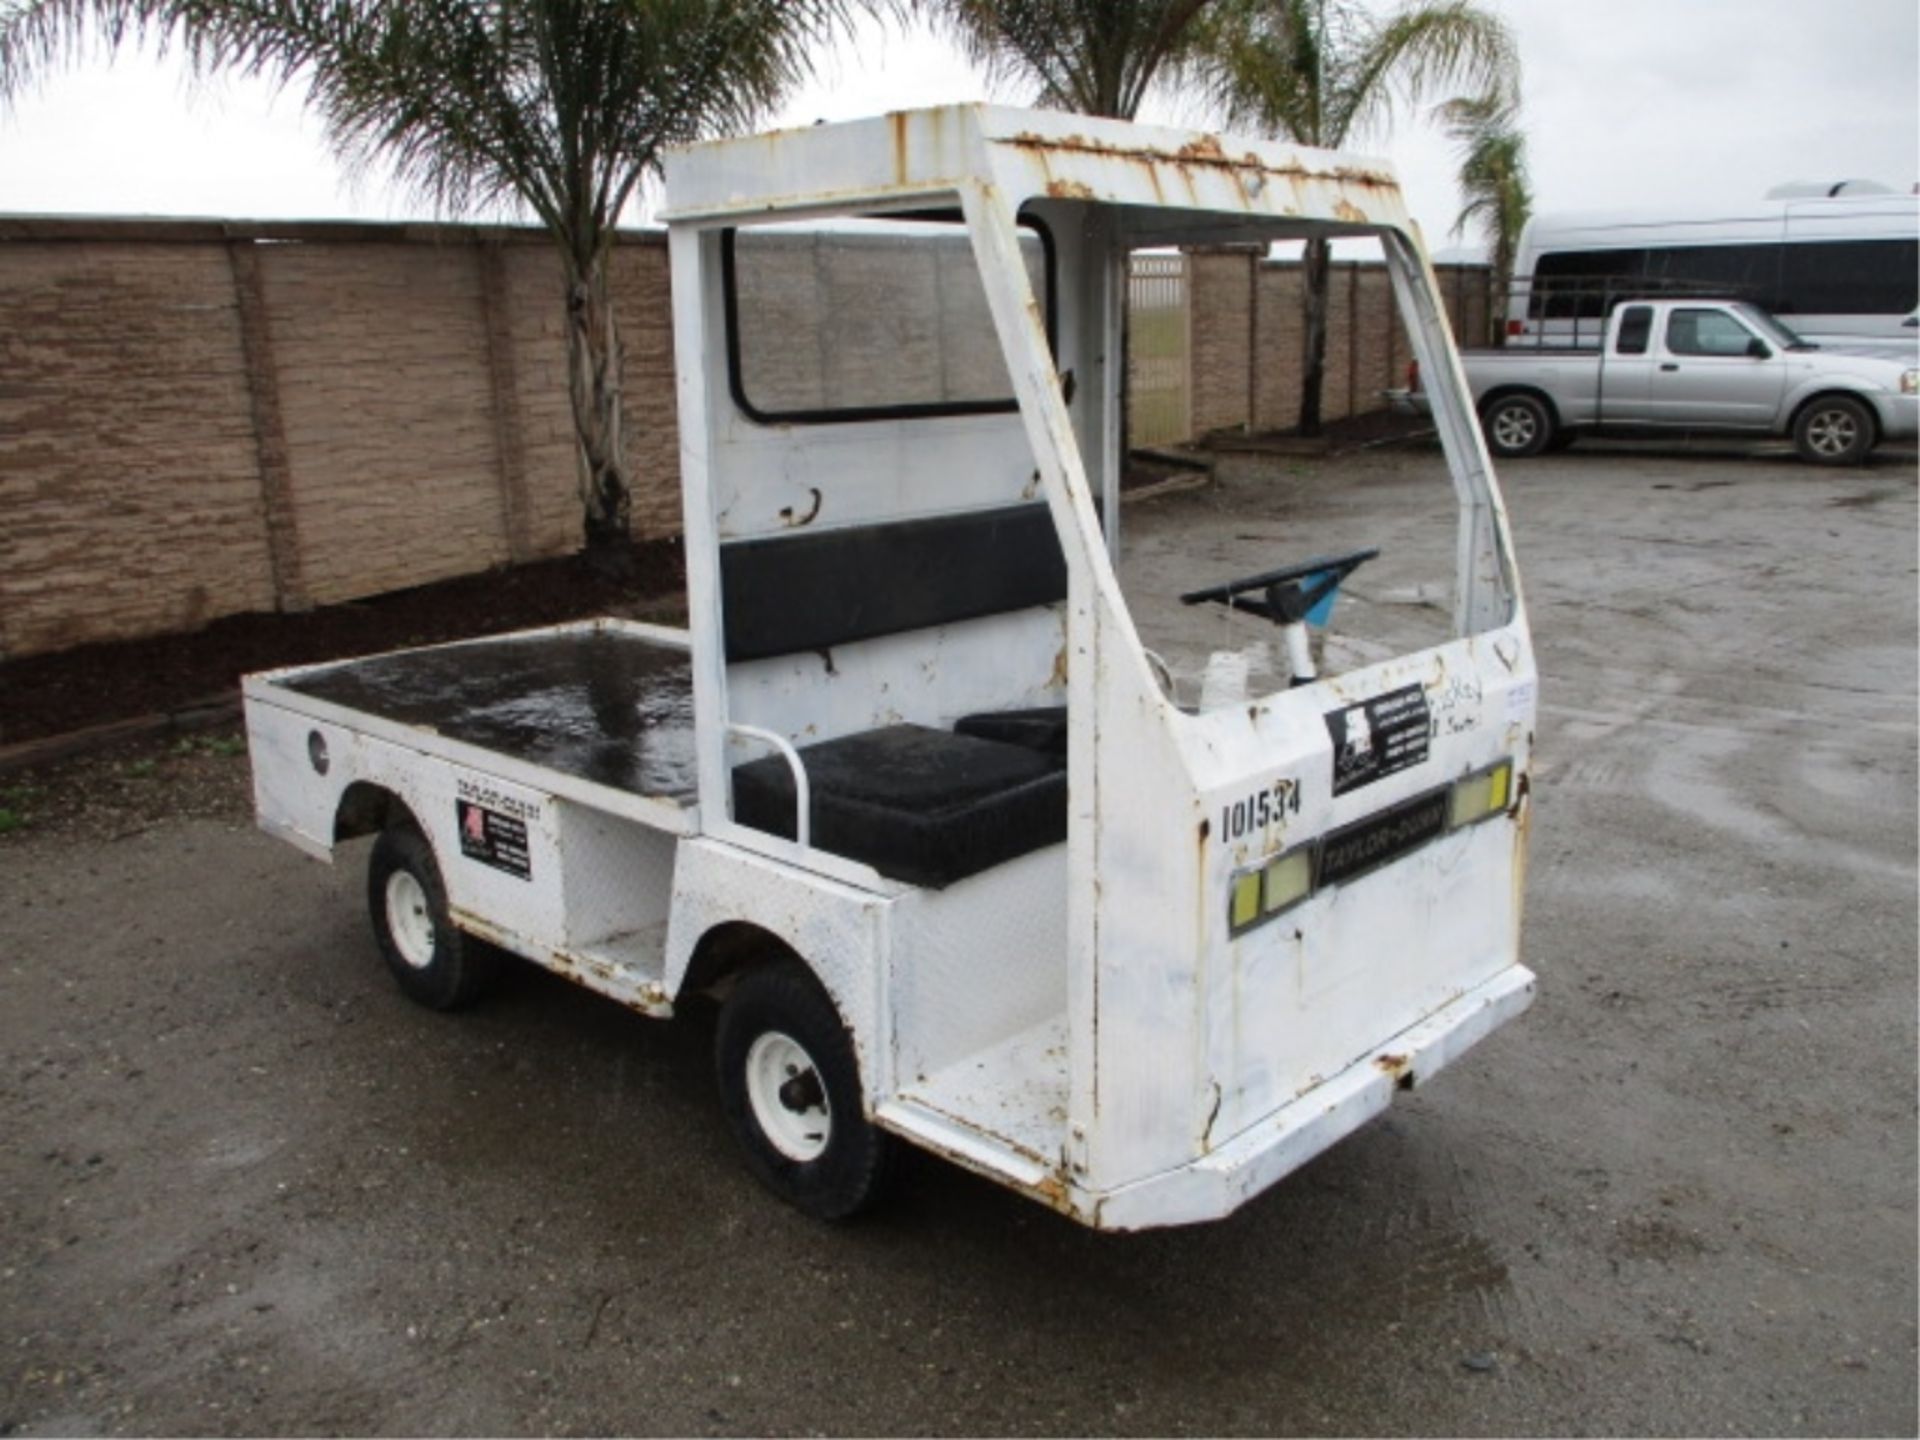 Taylor-Dunn Utility Cart, Gas, Rear Flatbed, Canopy, S/N: 101534 - Image 10 of 35